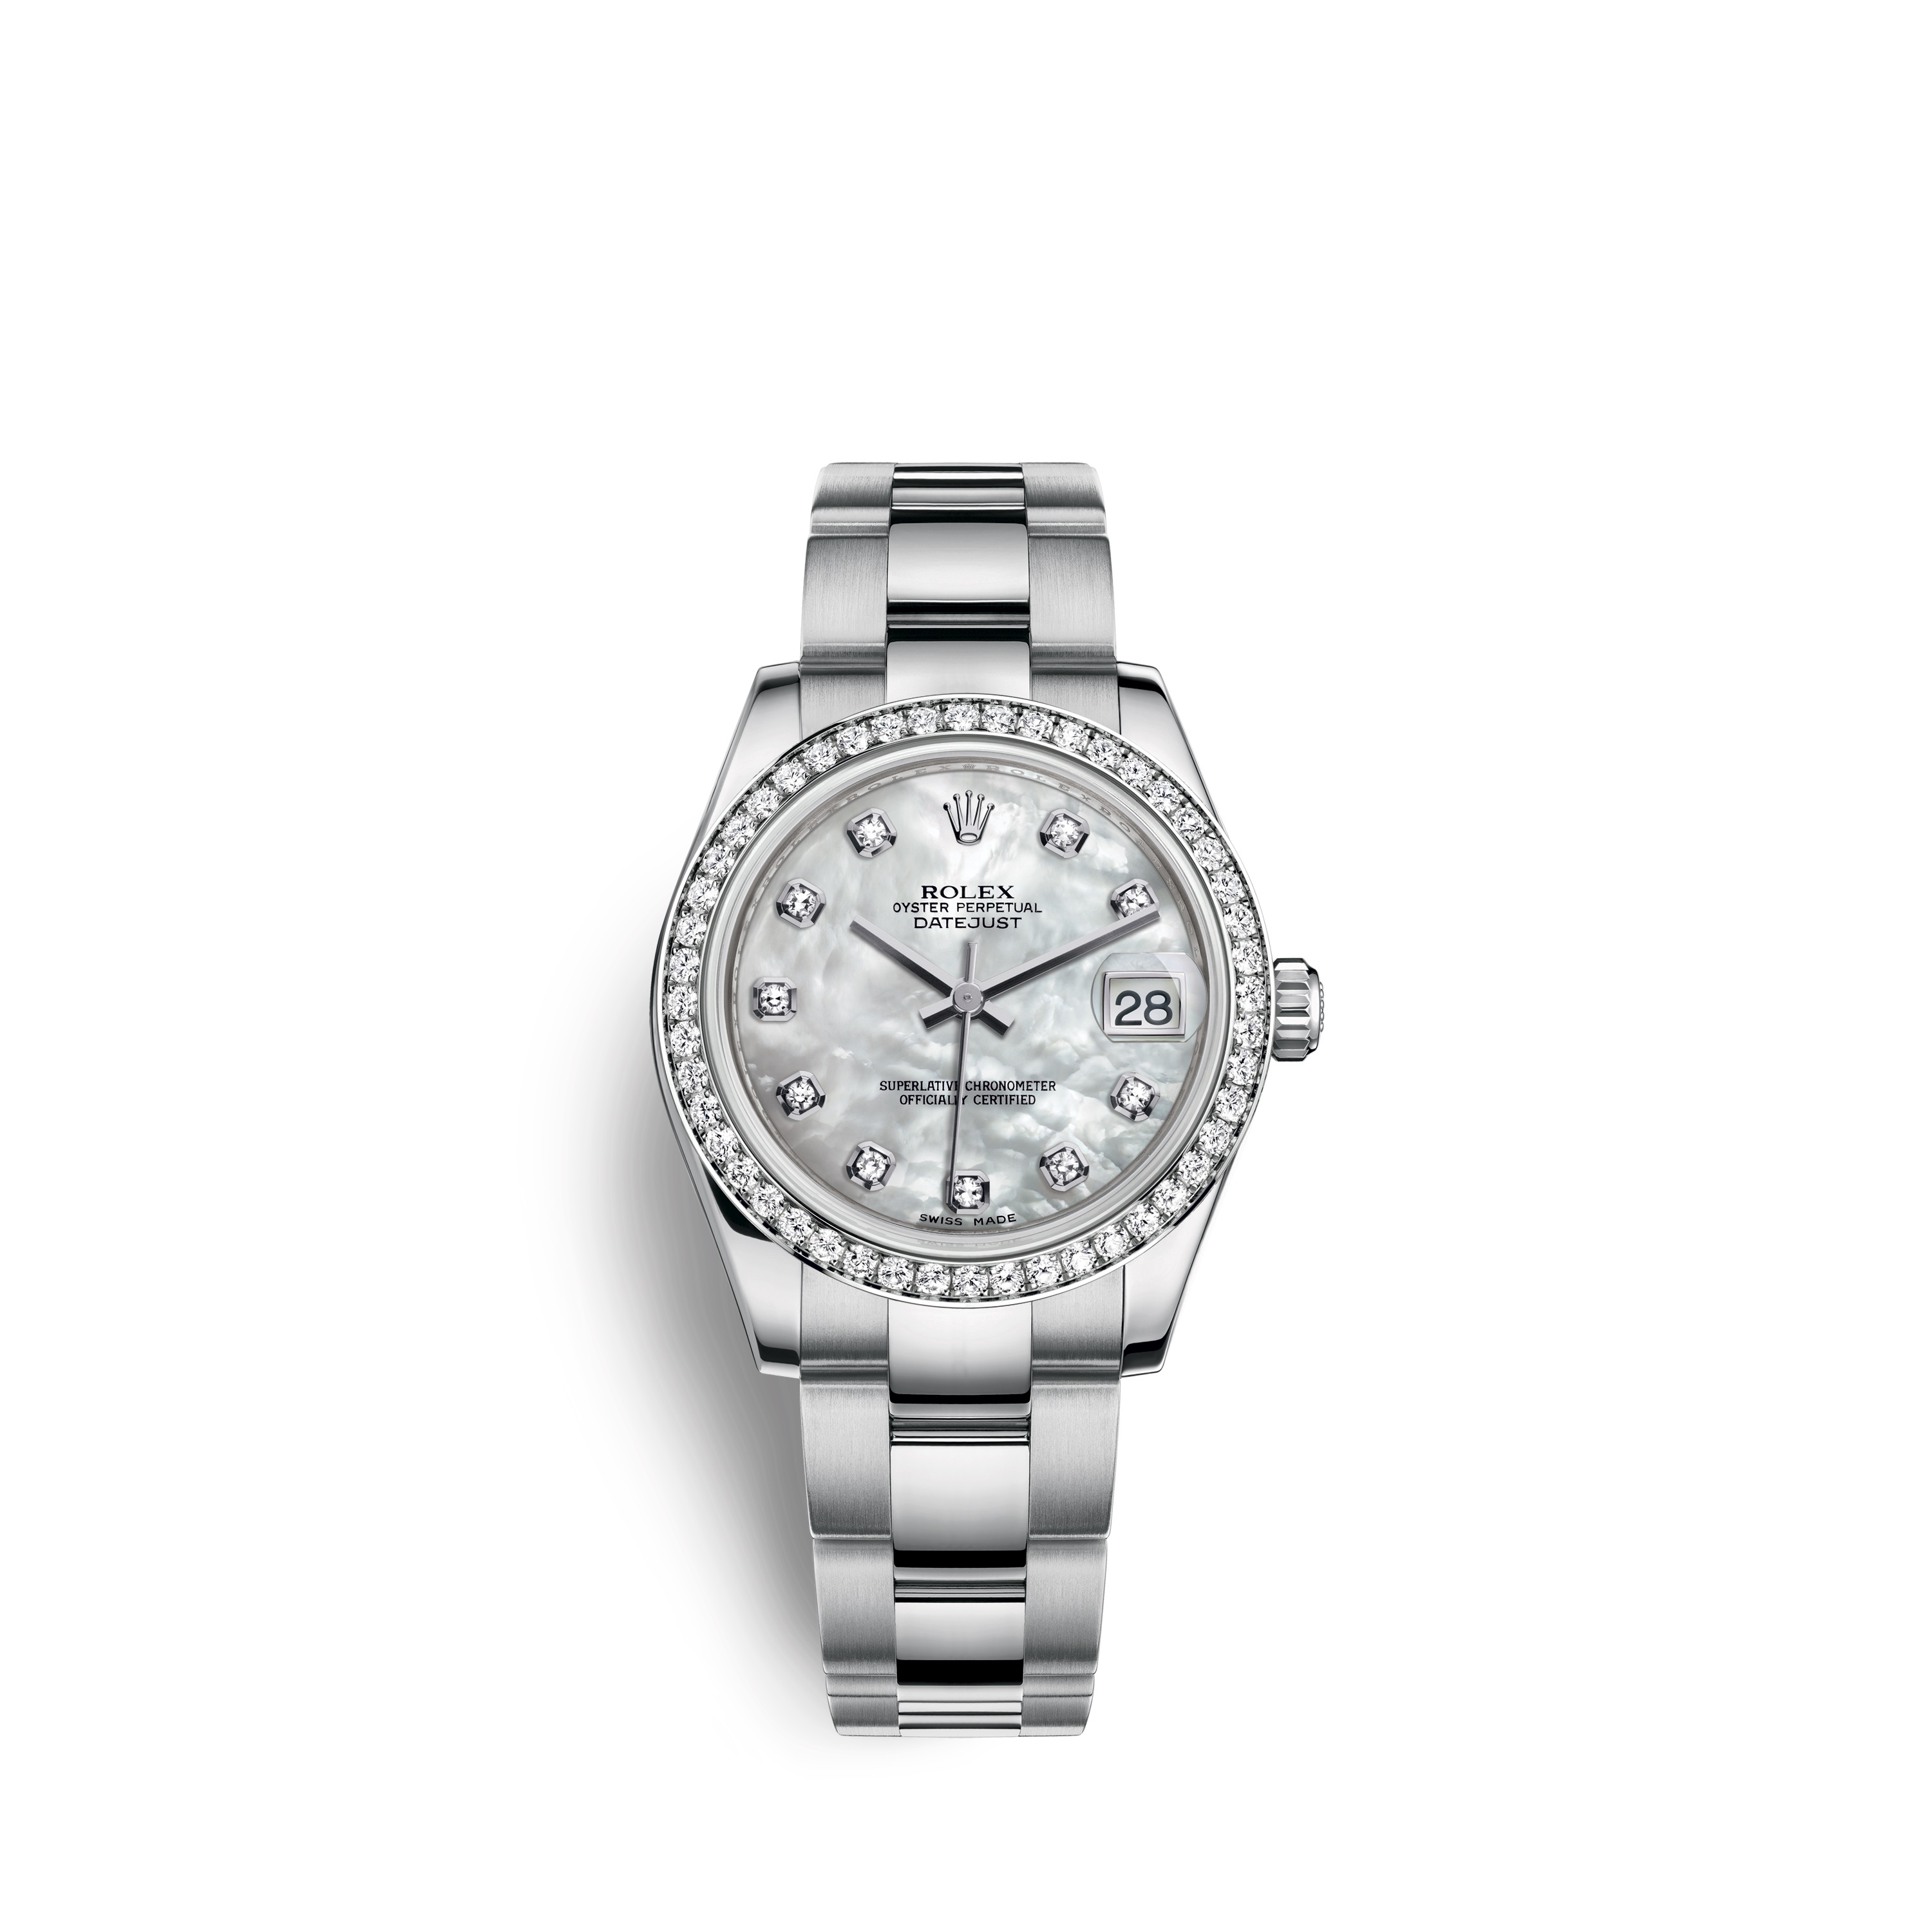 Datejust 31 178384 White Gold & Diamonds Watch (White Mother-of-Pearl Set with Diamonds)